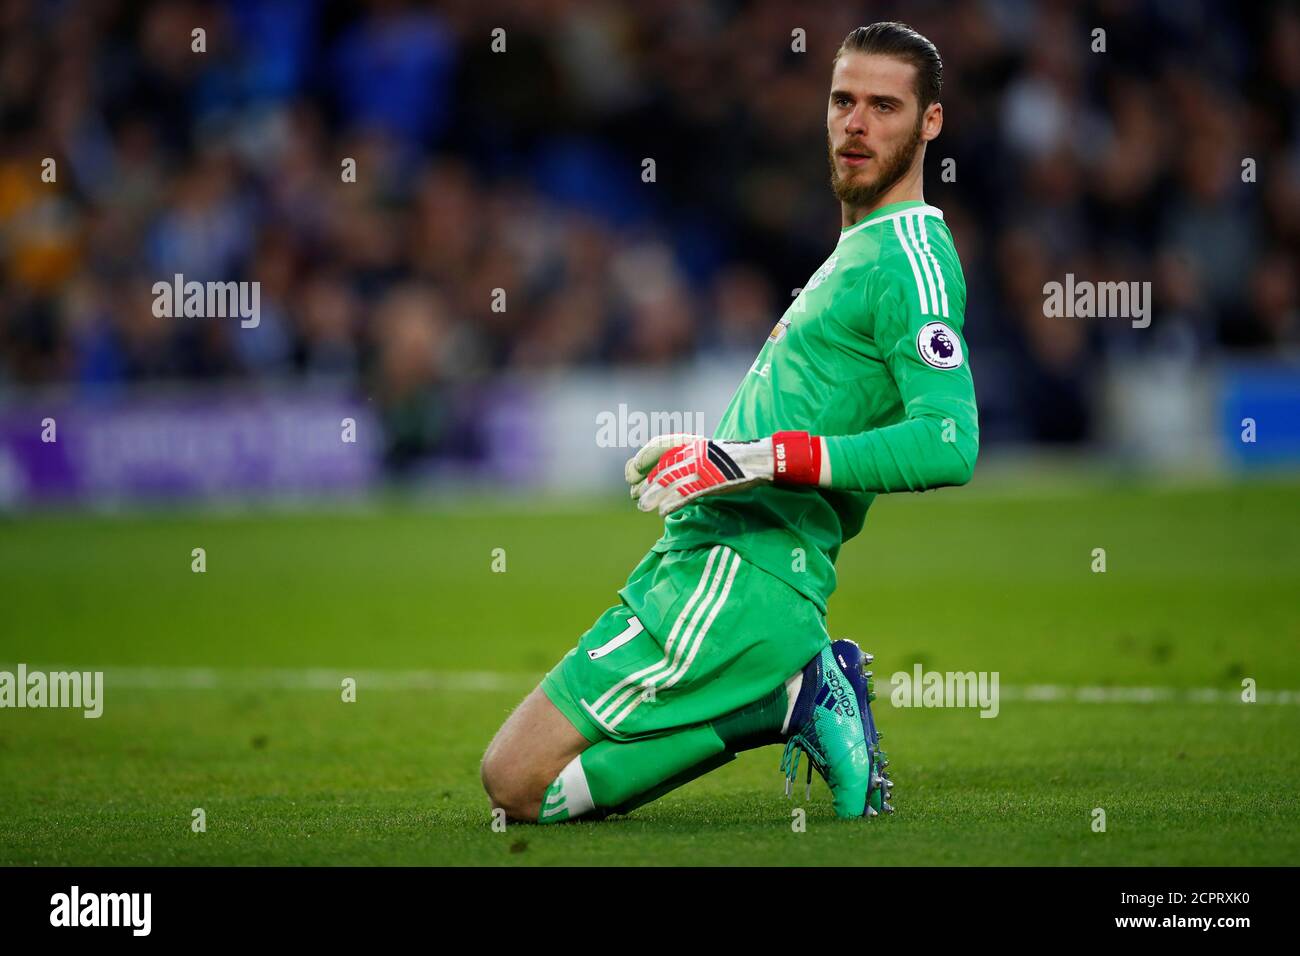 Soccer Football - Premier League - Brighton & Hove Albion v Manchester United - The American Express Community Stadium, Brighton, Britain - May 4, 2018   Manchester United's David De Gea reacts after making a save   REUTERS/Eddie Keogh    EDITORIAL USE ONLY. No use with unauthorized audio, video, data, fixture lists, club/league logos or 'live' services. Online in-match use limited to 75 images, no video emulation. No use in betting, games or single club/league/player publications.  Please contact your account representative for further details. Stock Photo